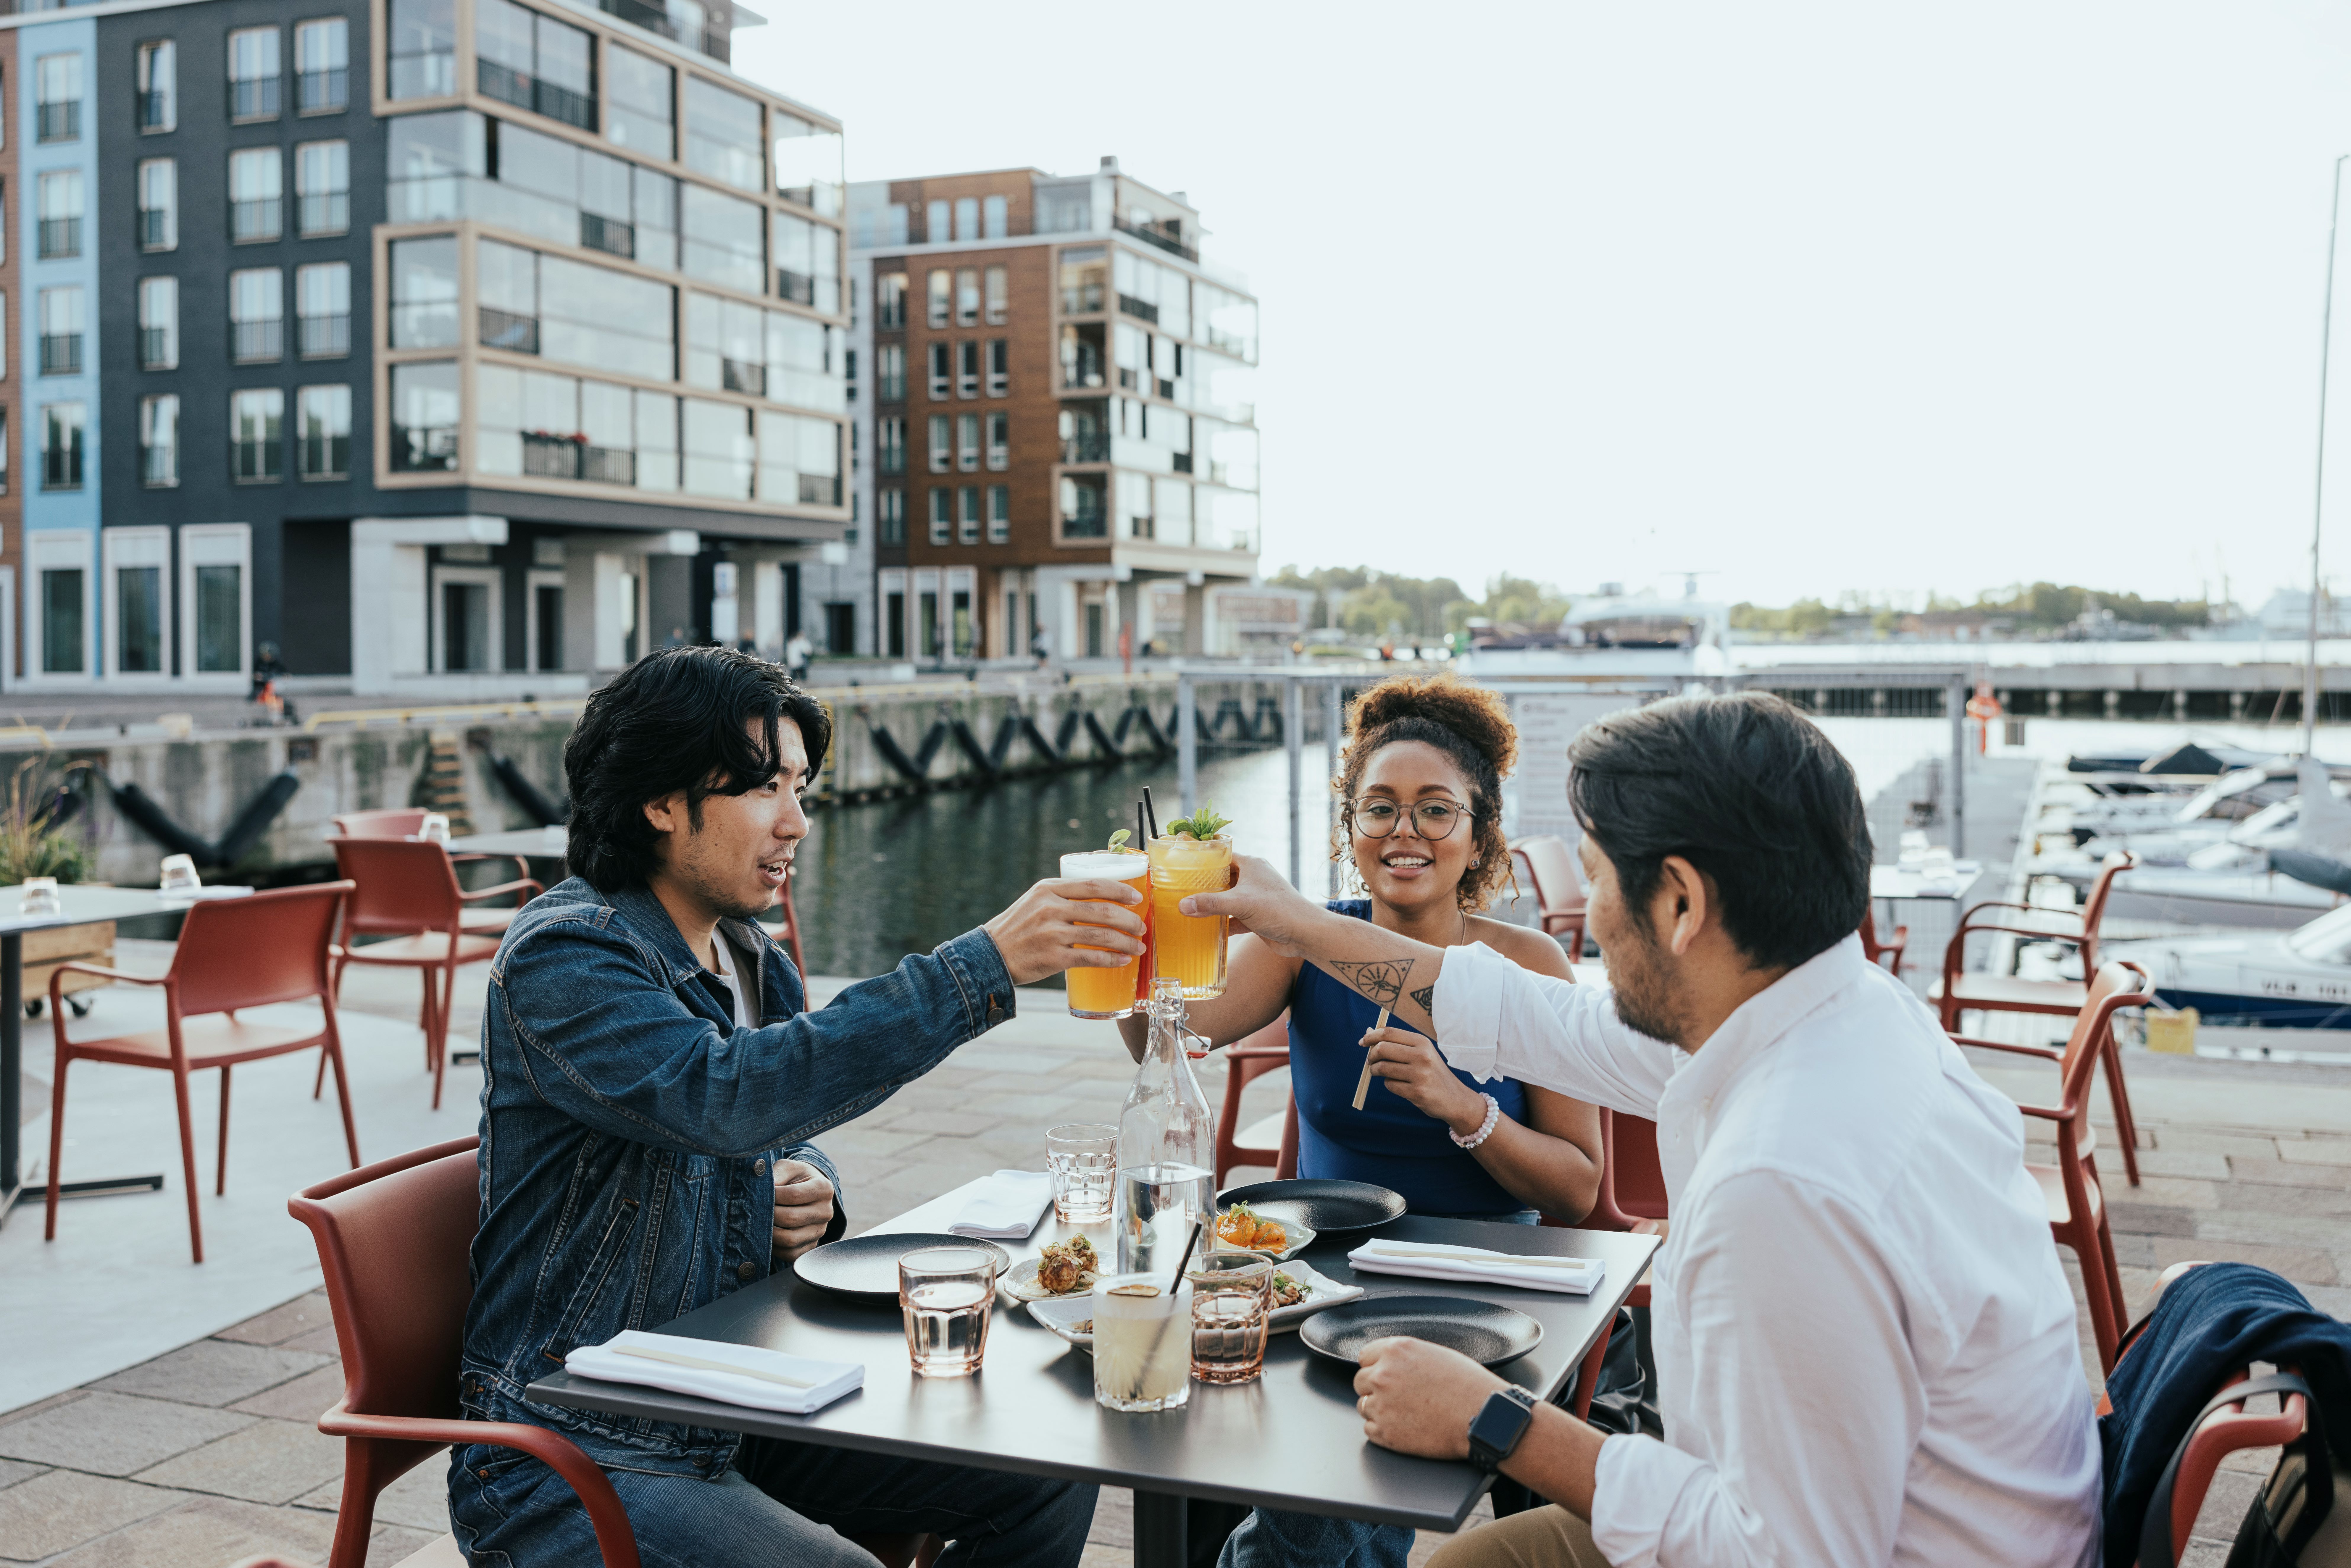 Three friends sitting and toasting at a restaurant table in the Noblessner seafront area of Tallinn, Estonia.